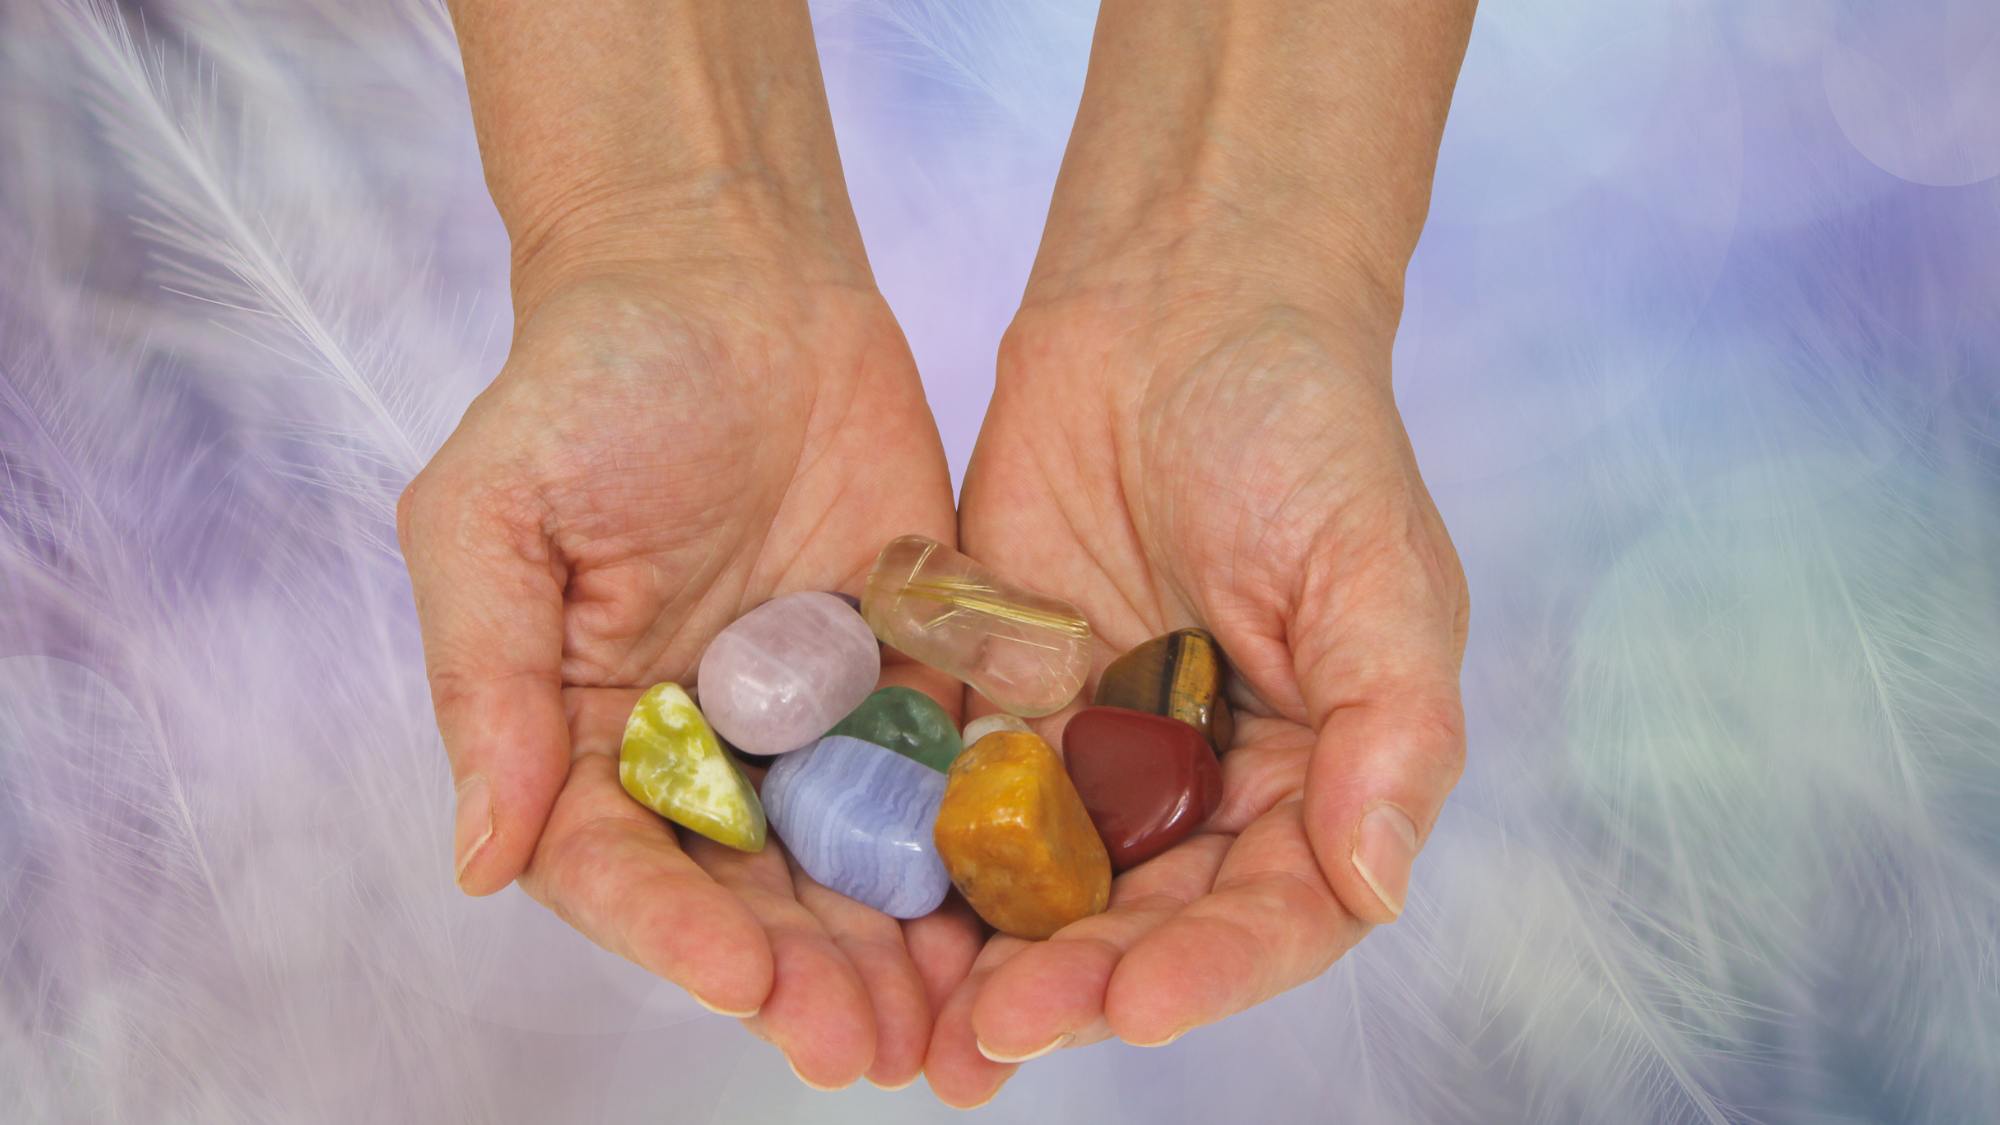 How do Gemstone help you to solve problems?